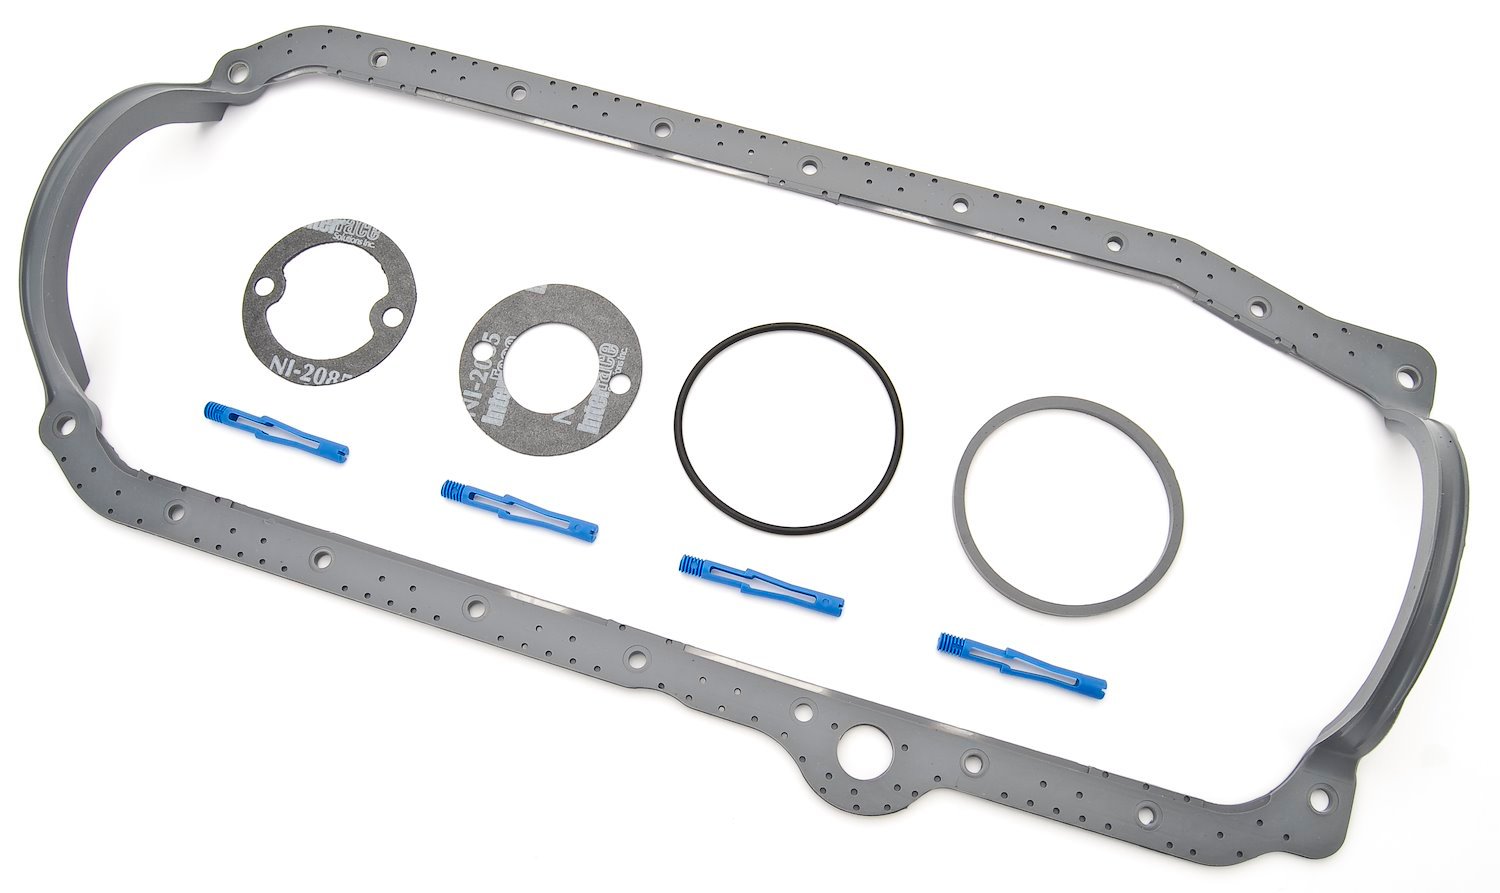 Oil Pan Gasket for 1986-2002 Small Block Chevy Including LT Series (excluding LS)